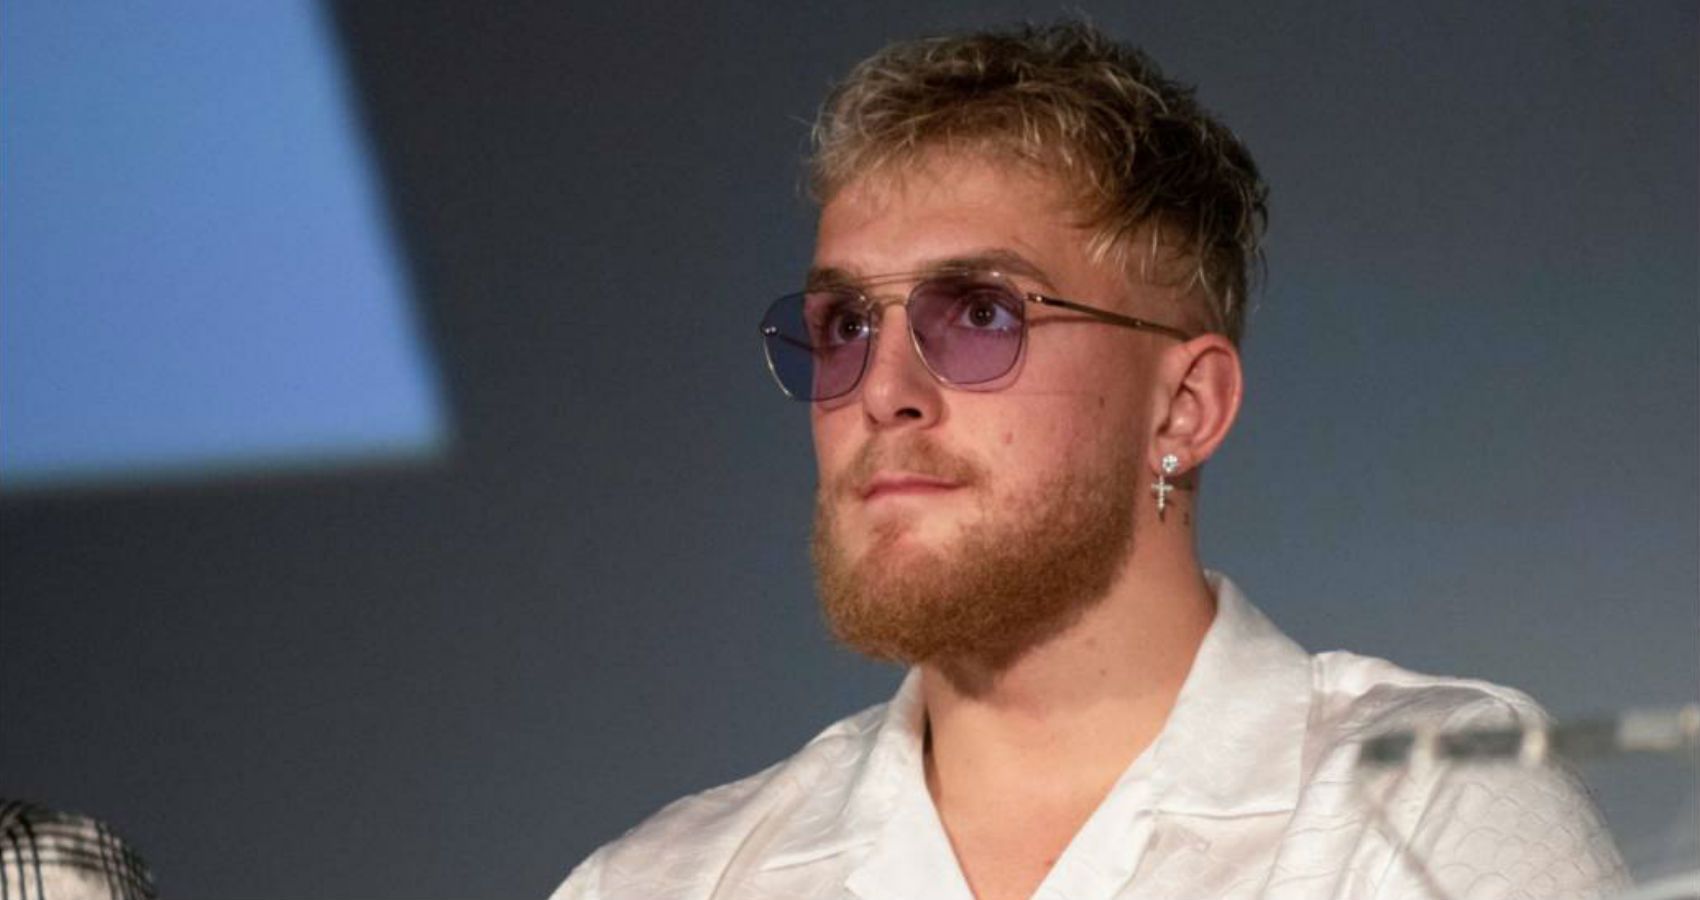 jake paul tells young fans drop school make money with him